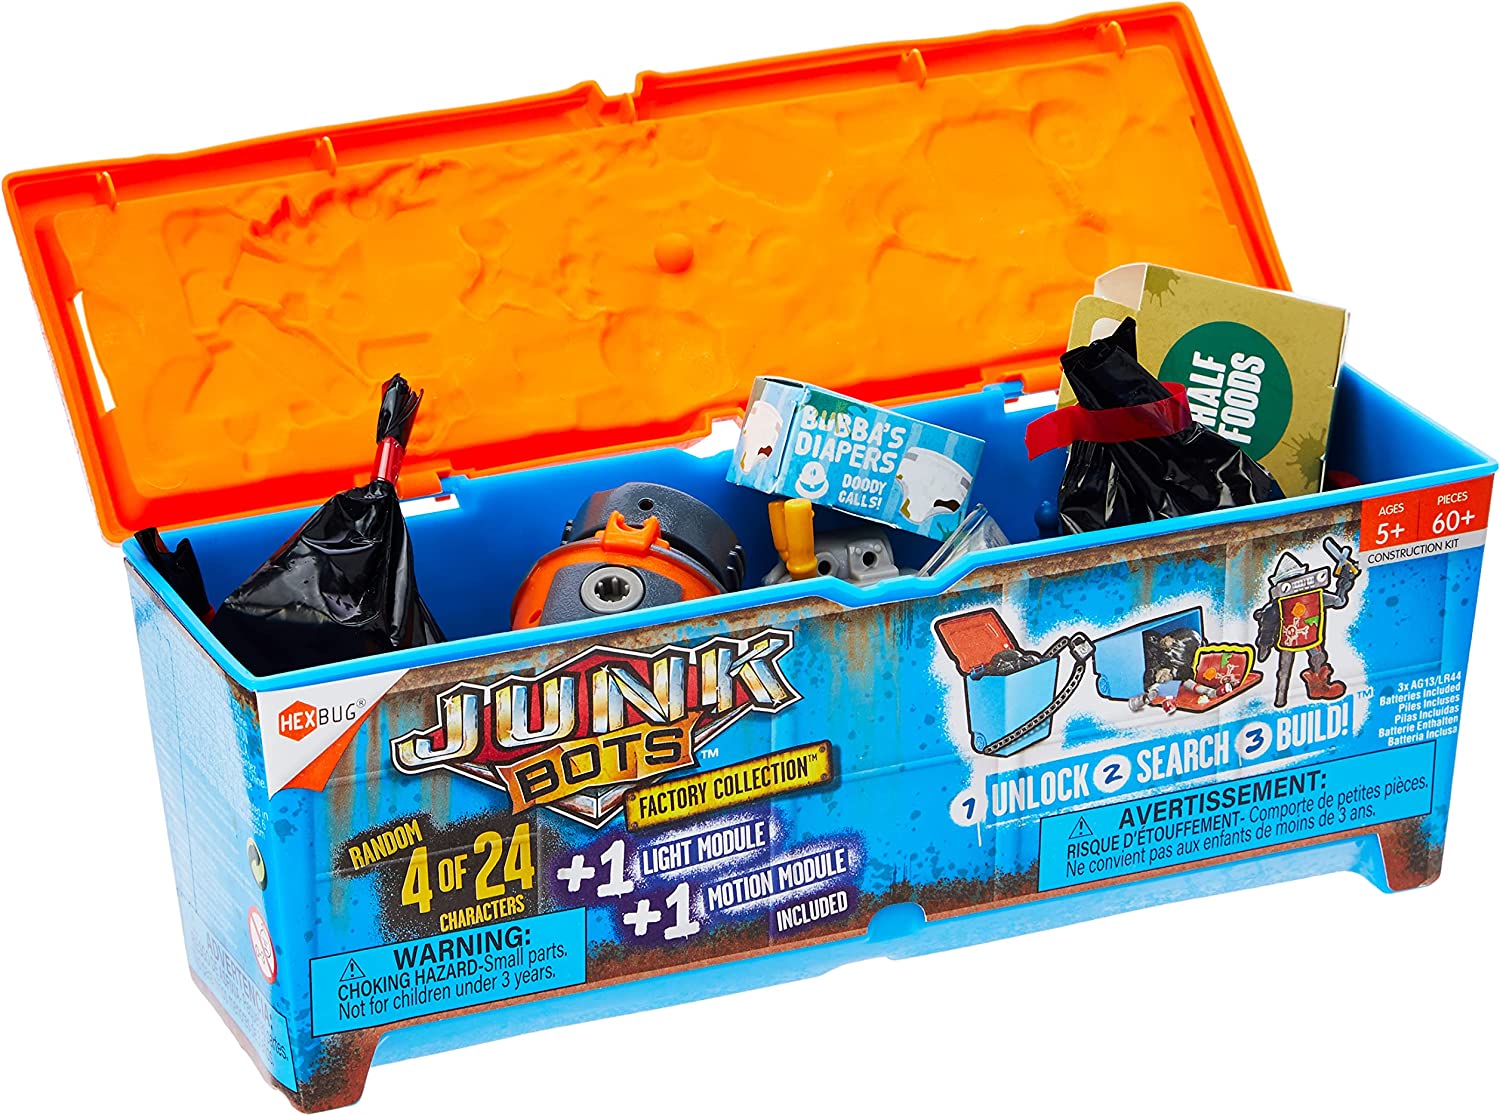 Hexbug Junkbots - Industrial Dumpster With 4 Unique Characters to Assemble in Each Box - Pack of 2 - Toptoys2u